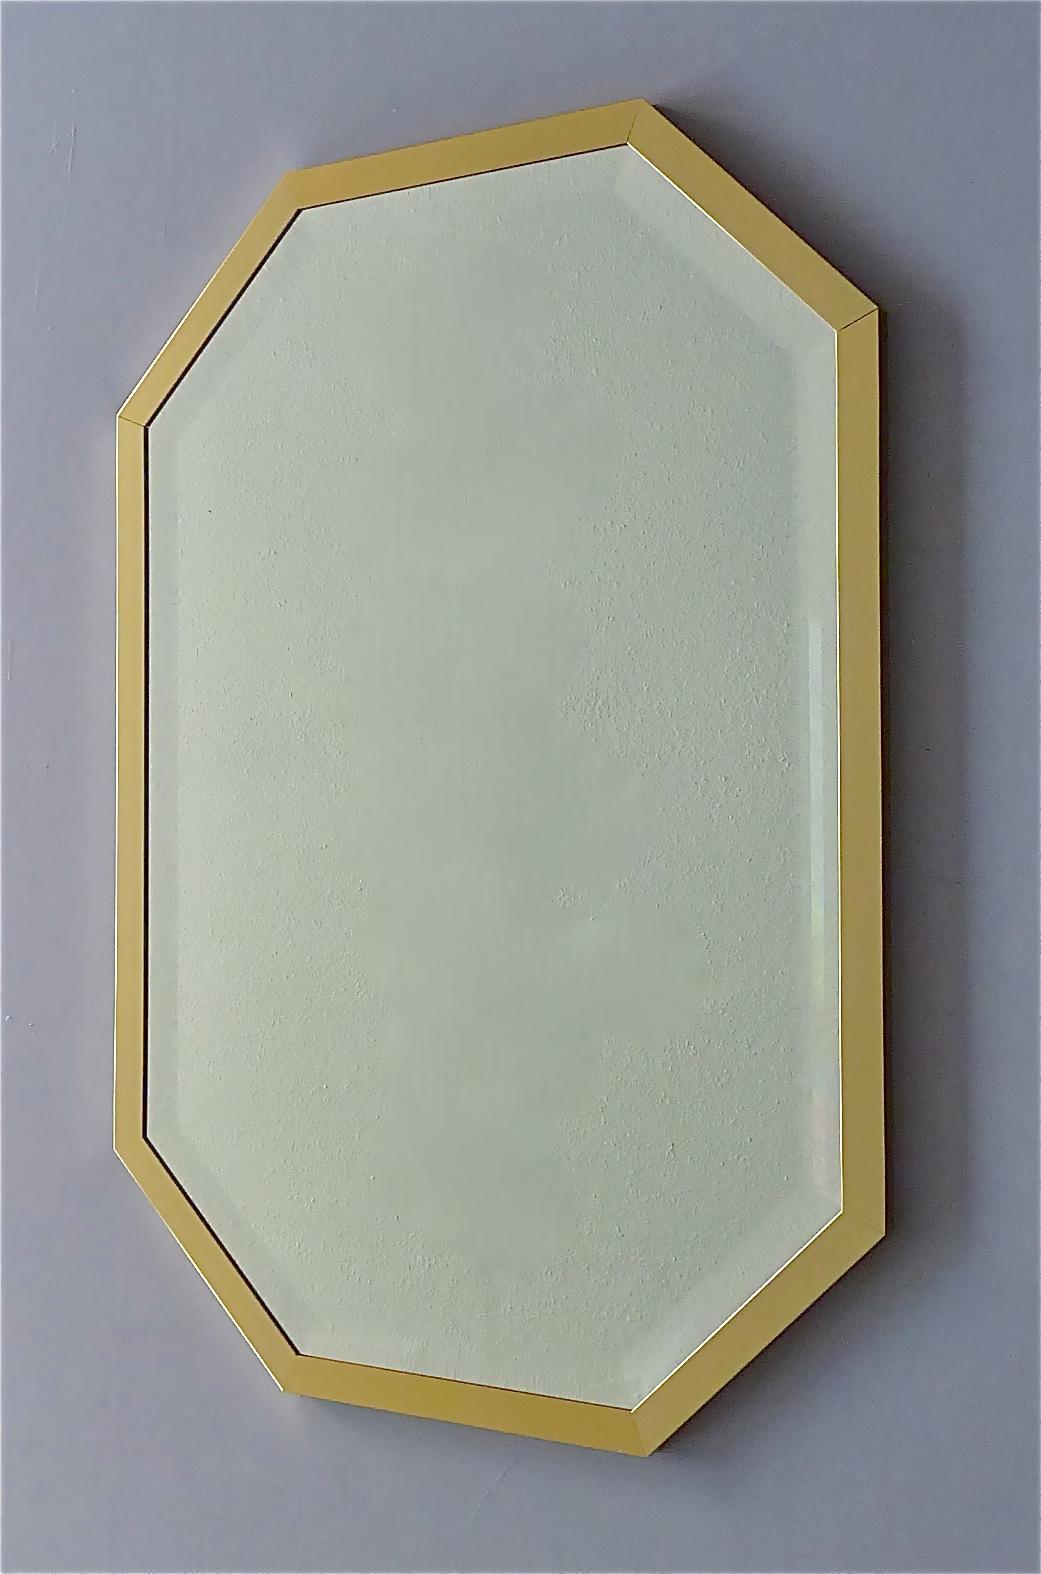 Beautiful large octagonal Maison Jansen, Gabriella Crespi, Willy Rizzo Style mirror made in Germany around 1970s. The high quality mirror has an octagonal shape with a gilt brass frame and a faceted crystal glass mirror. The sleek and elegant mirror